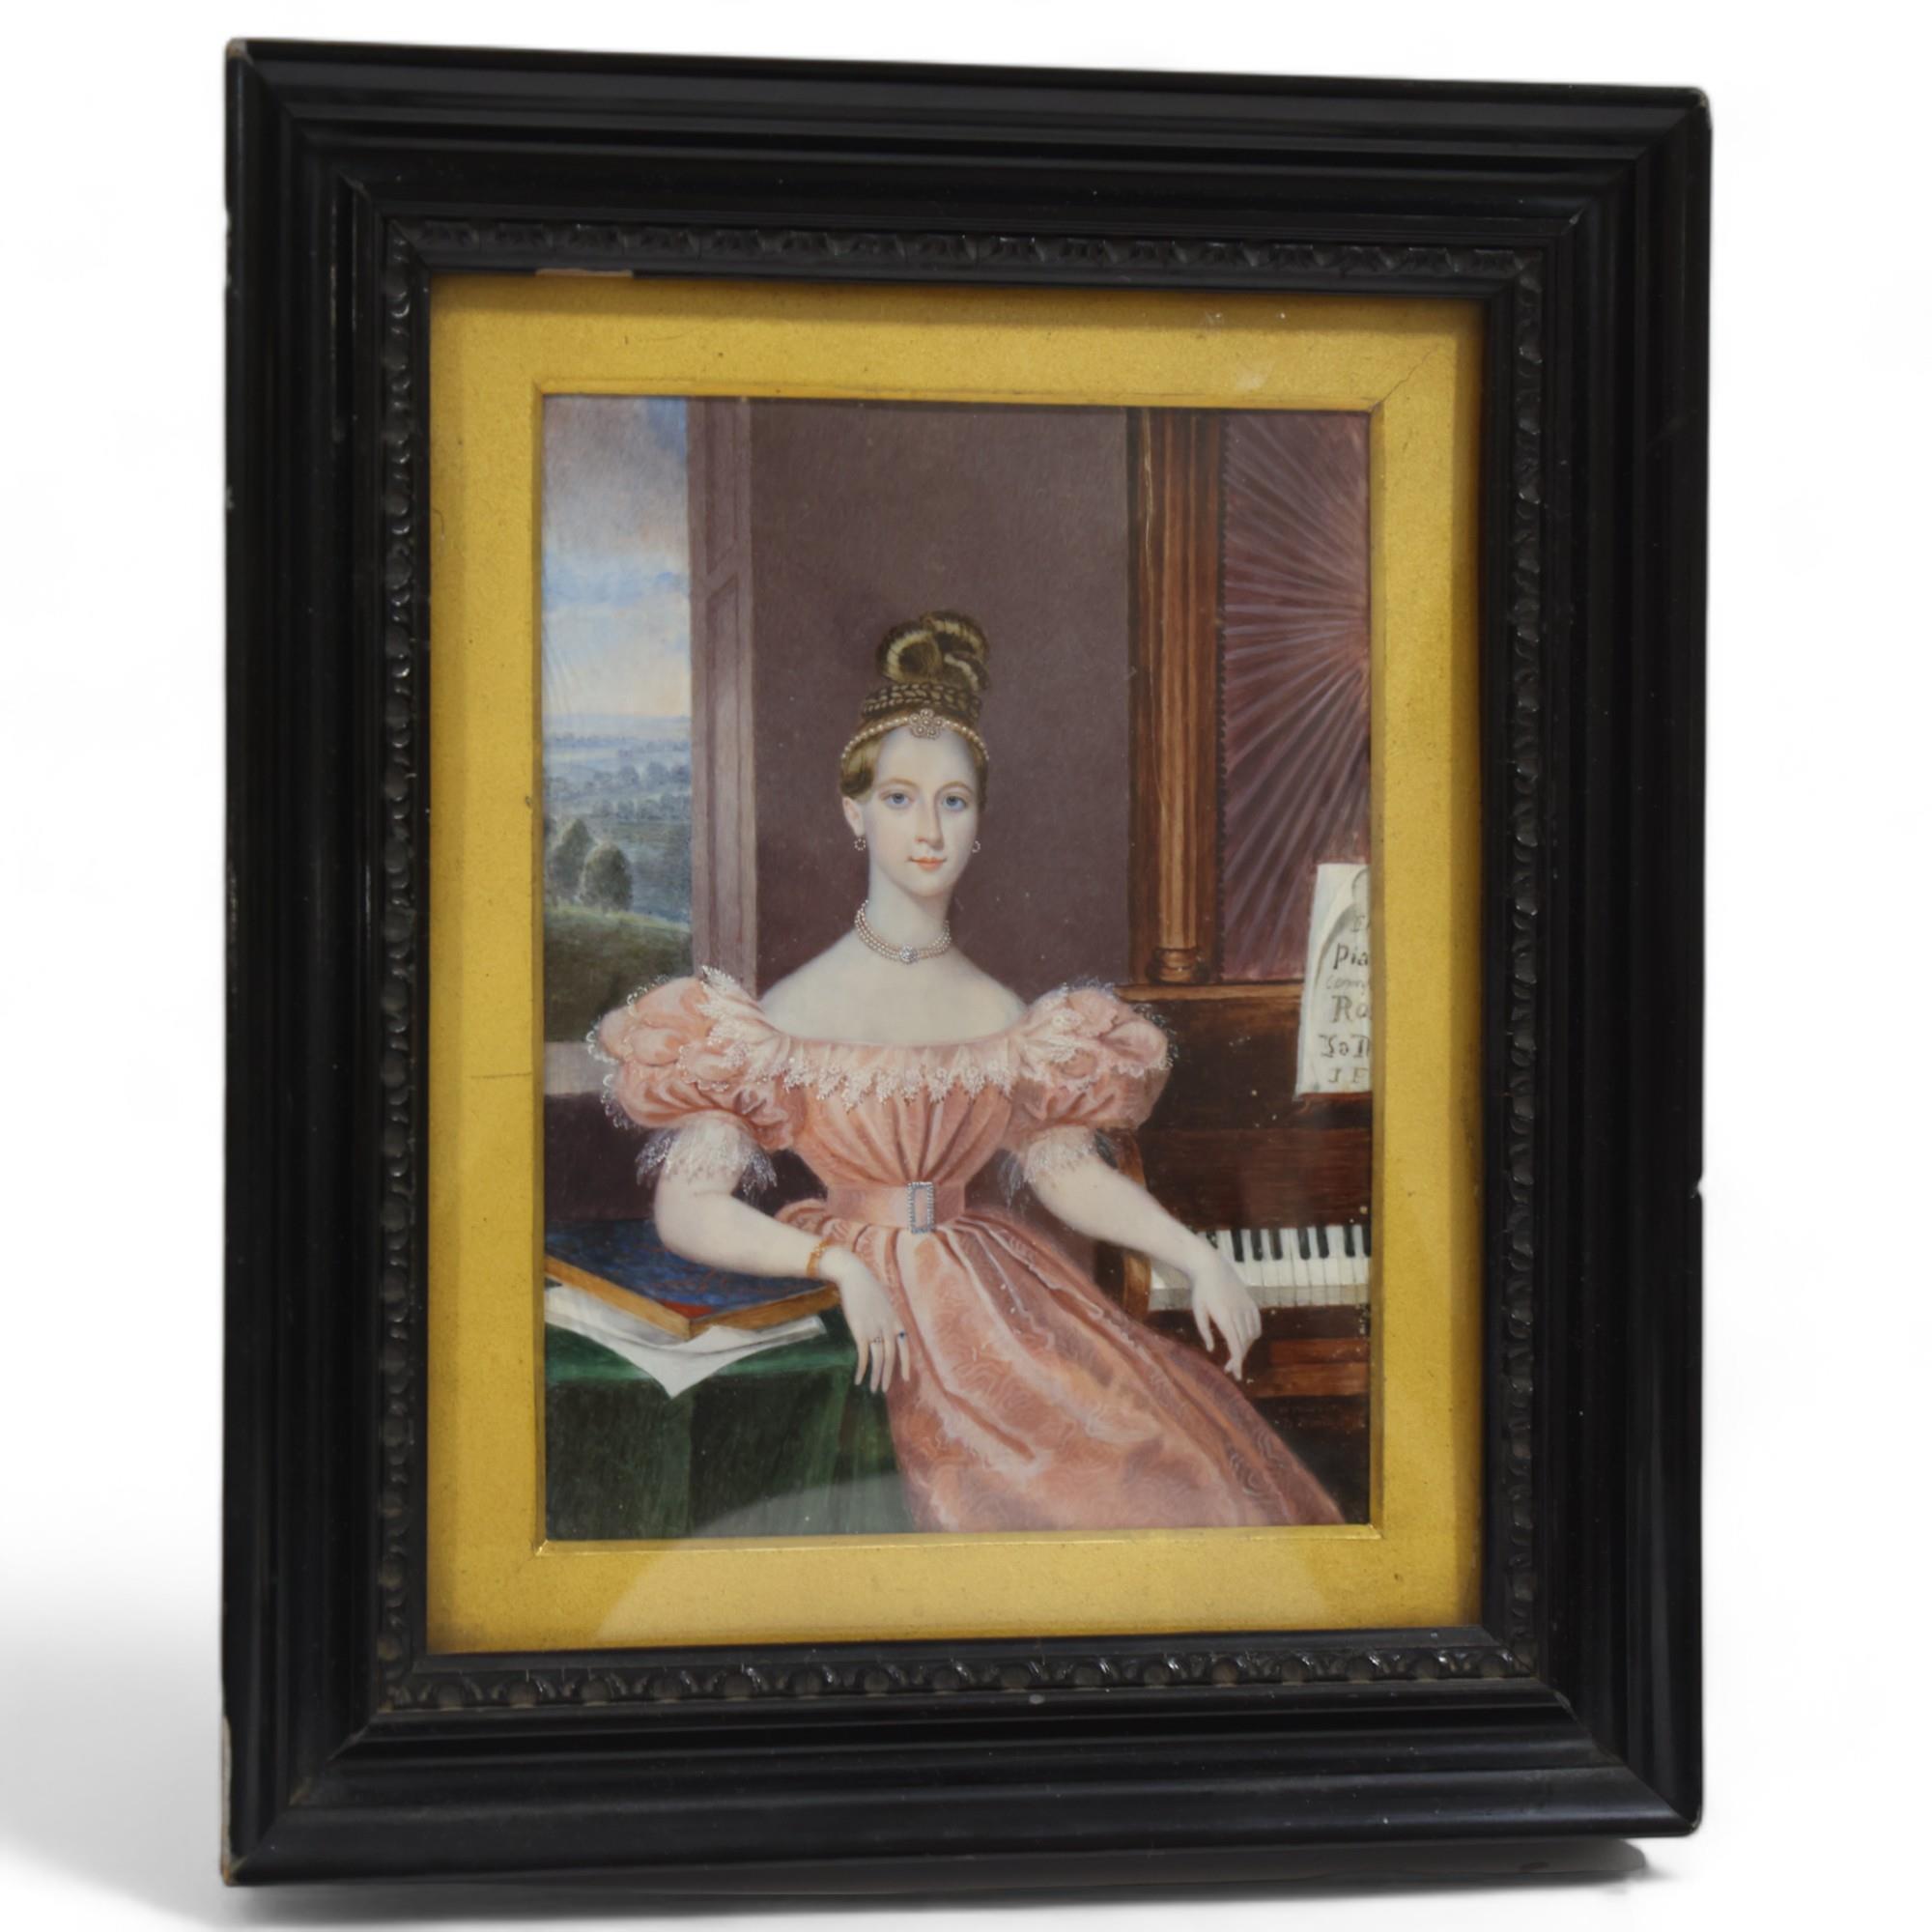 William Hudson, portrait of a young woman seated at a piano, miniature watercolour on ivorine,